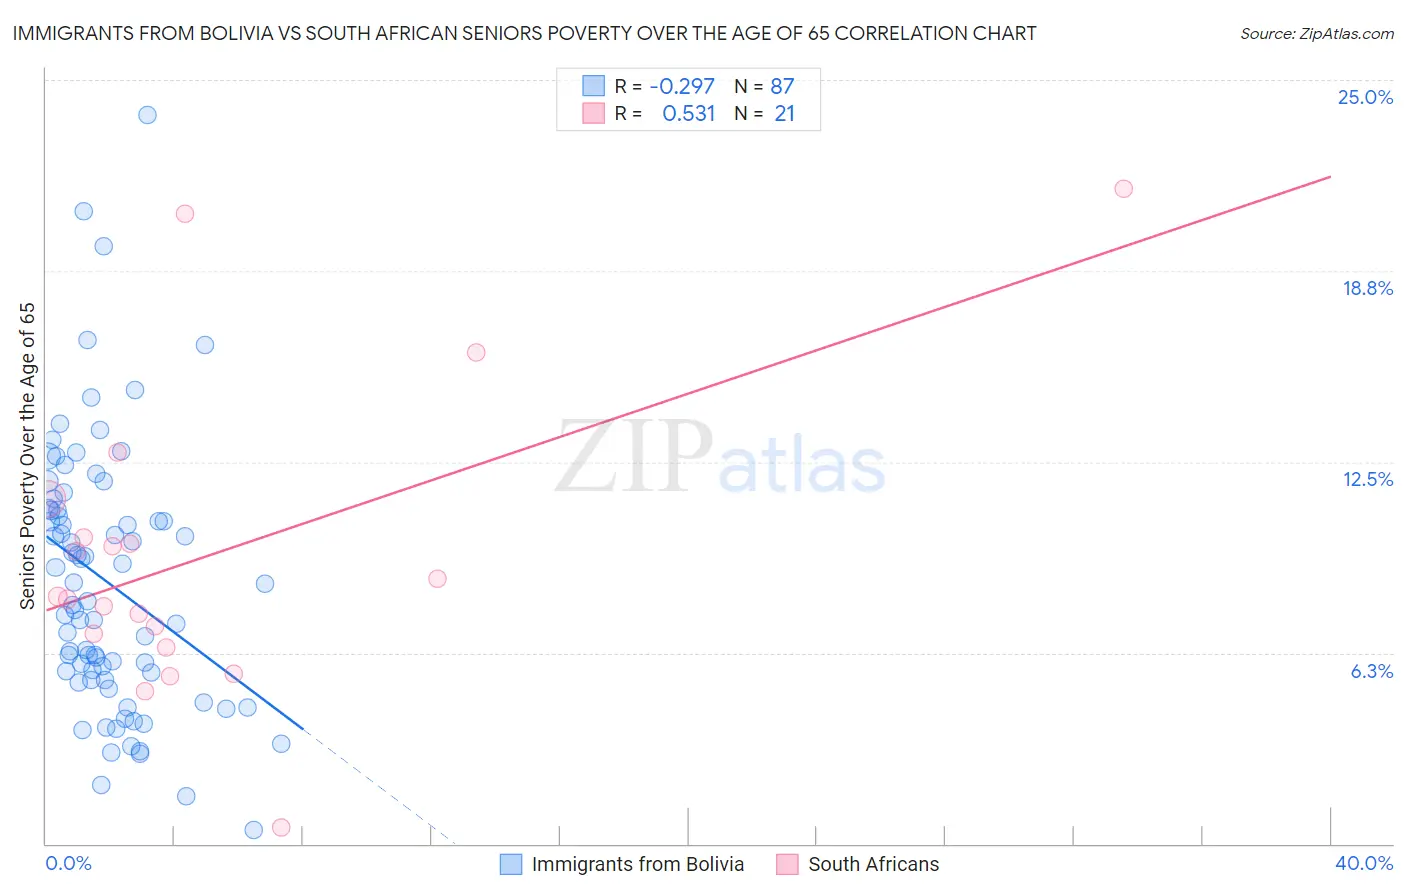 Immigrants from Bolivia vs South African Seniors Poverty Over the Age of 65